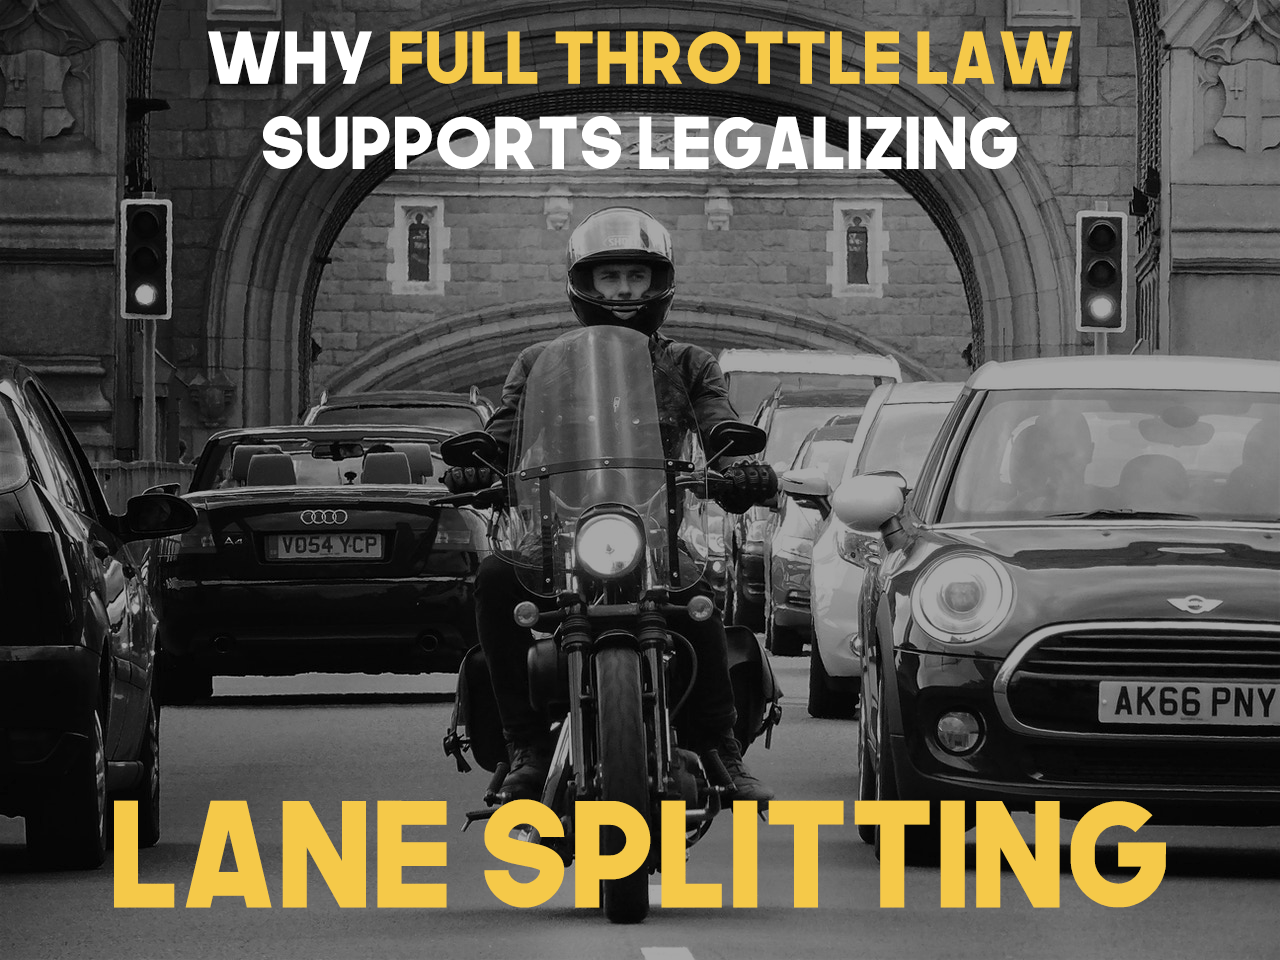 Why Full Throttle Law Supports Legalizing Lane Splitting or Filtering